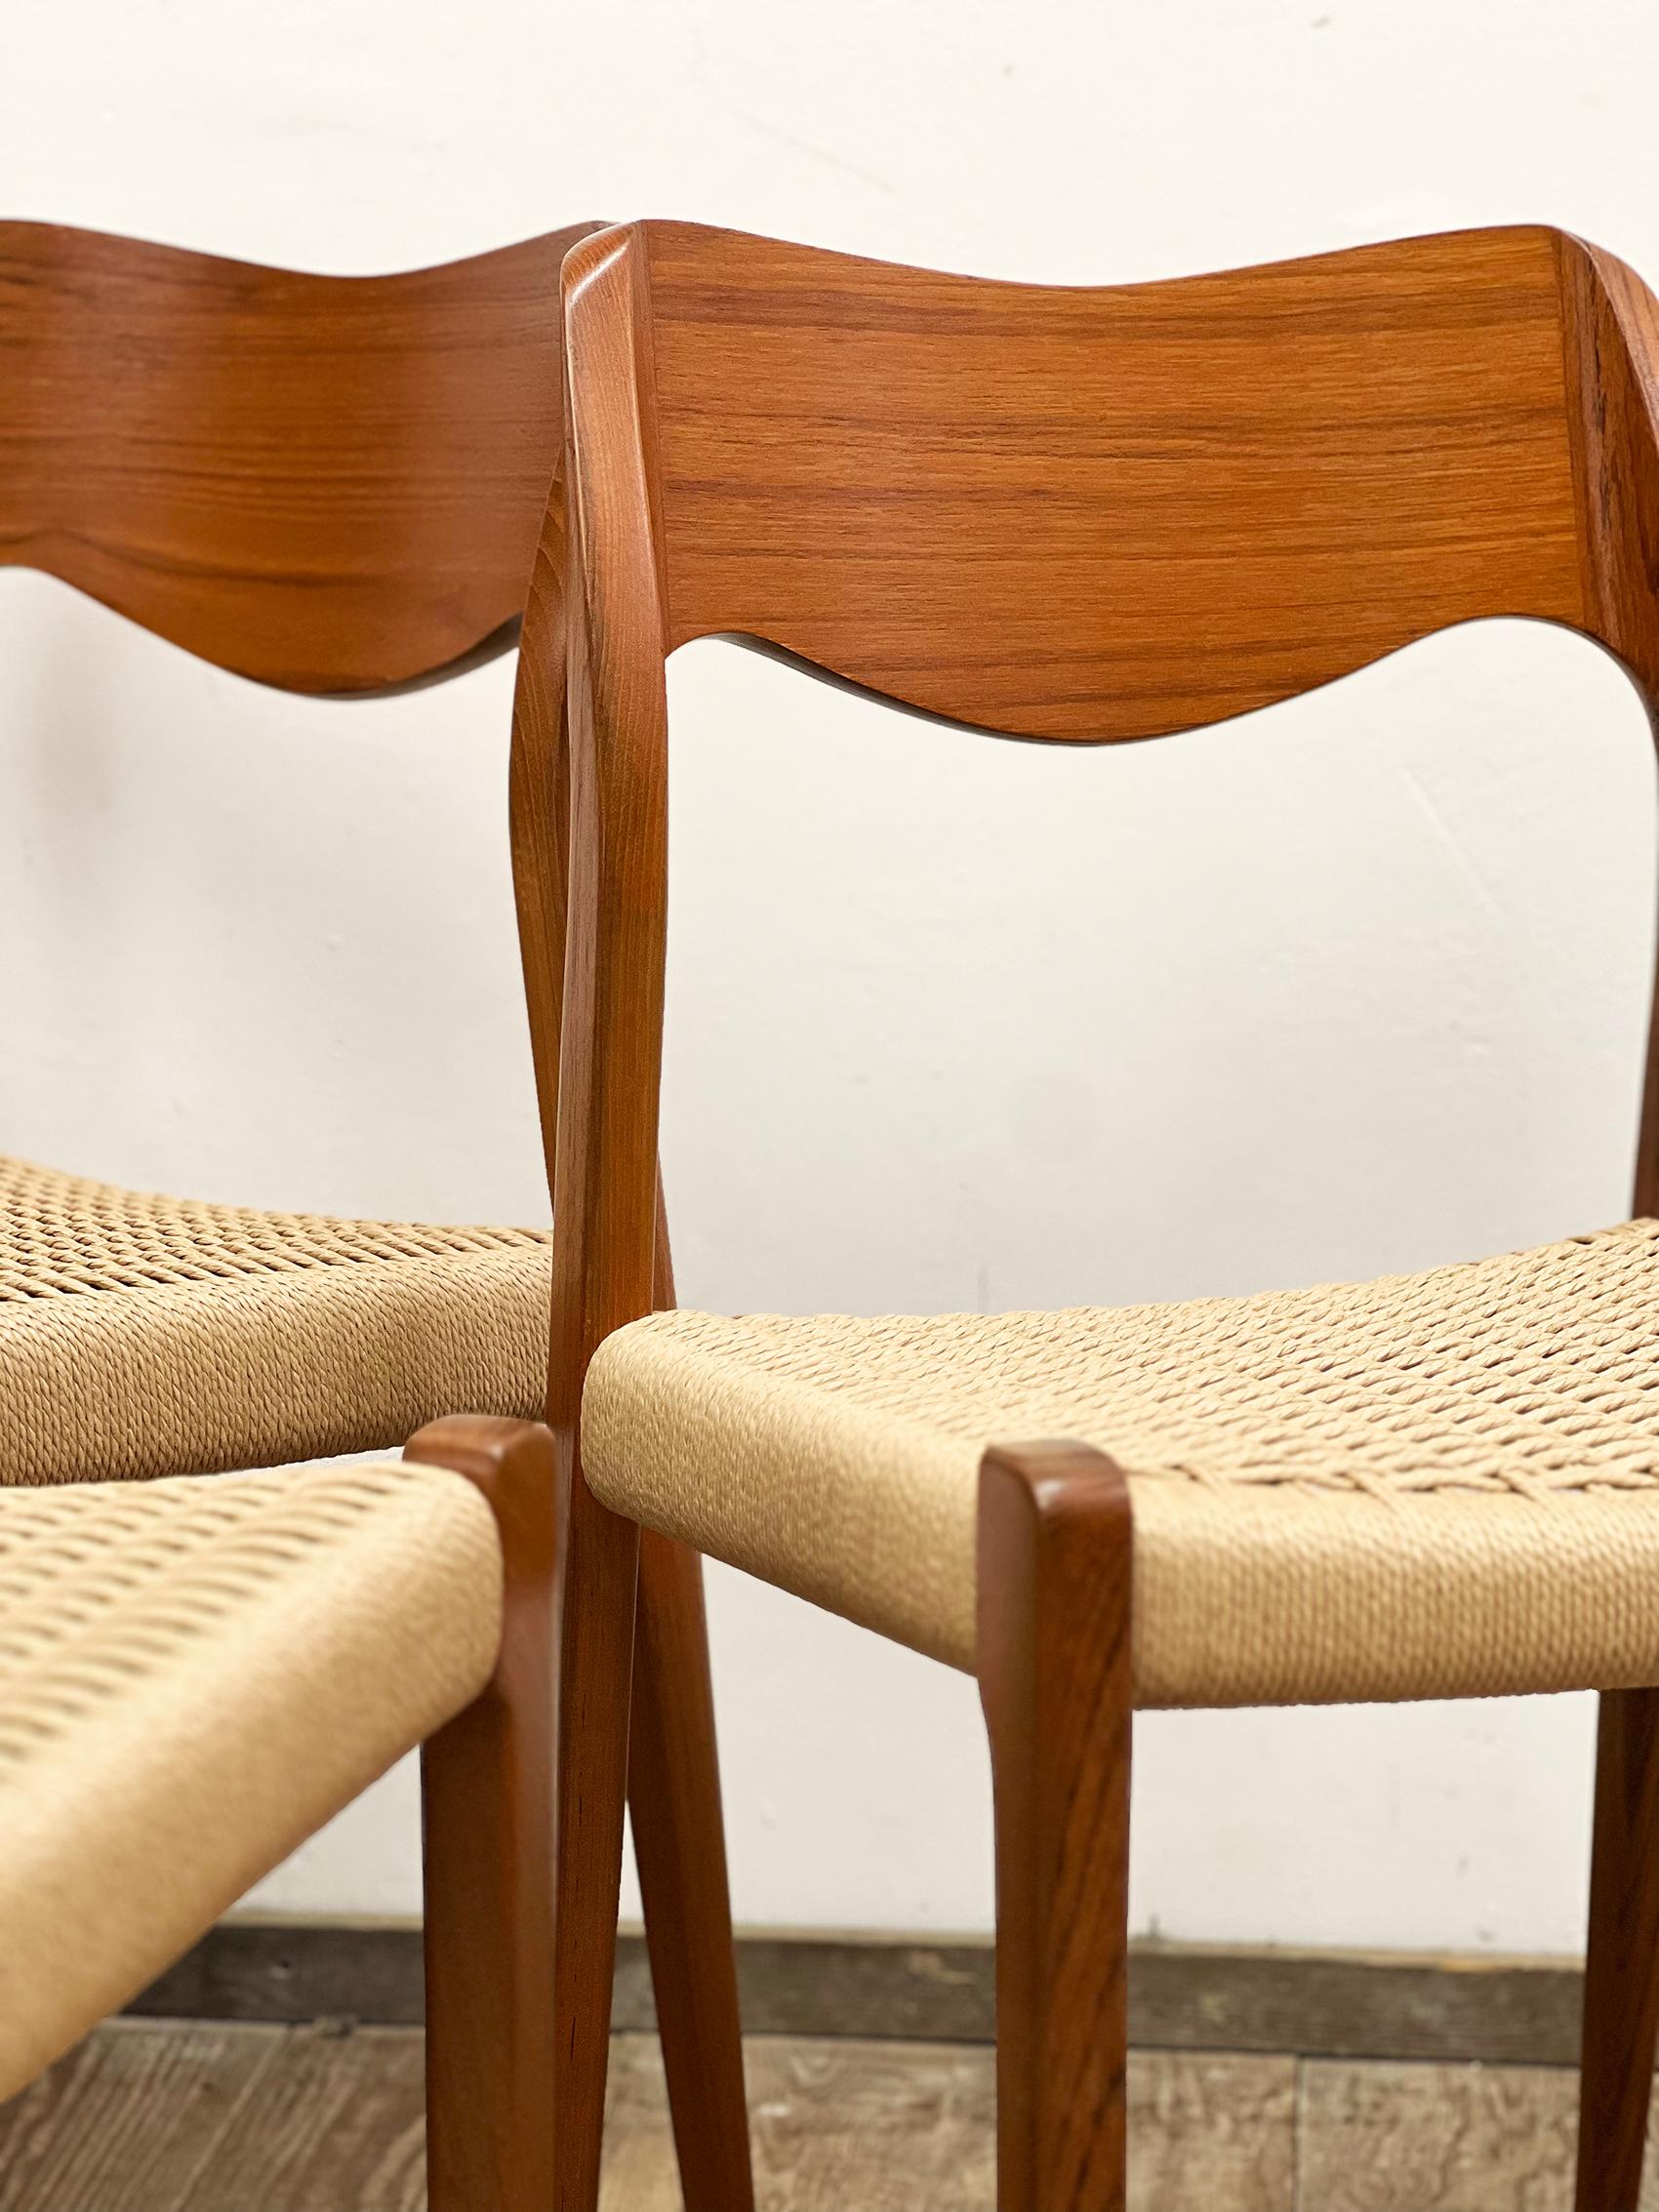 Mid-20th Century Mid-Century Teak Dining Chairs #71 by Niels O. Møller for J. L. Moller, Set of 4 For Sale